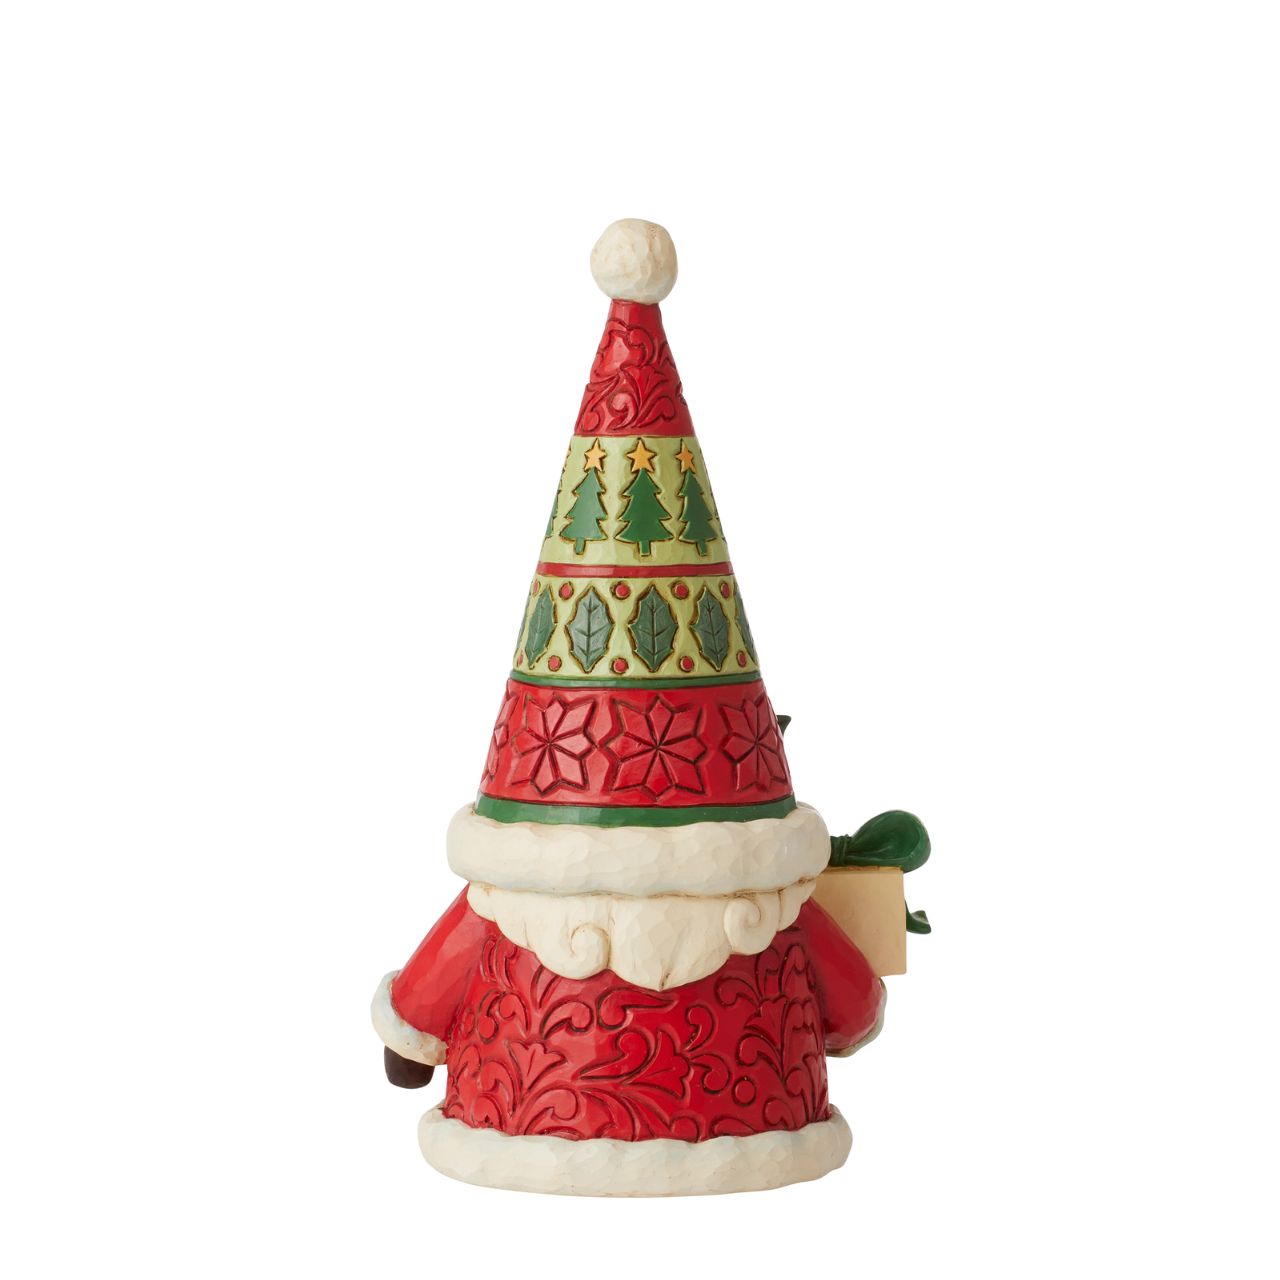 Santa Gnome Figurine by Jim Shore  "Gnomebody loves Christmas as much as Jim Shore" Gnomes have fast become a collectors favourite for Jim Shore and this collection, won't disappoint. This Santa Gnome has a holly on his hat carrying a Jim Shore designed present.